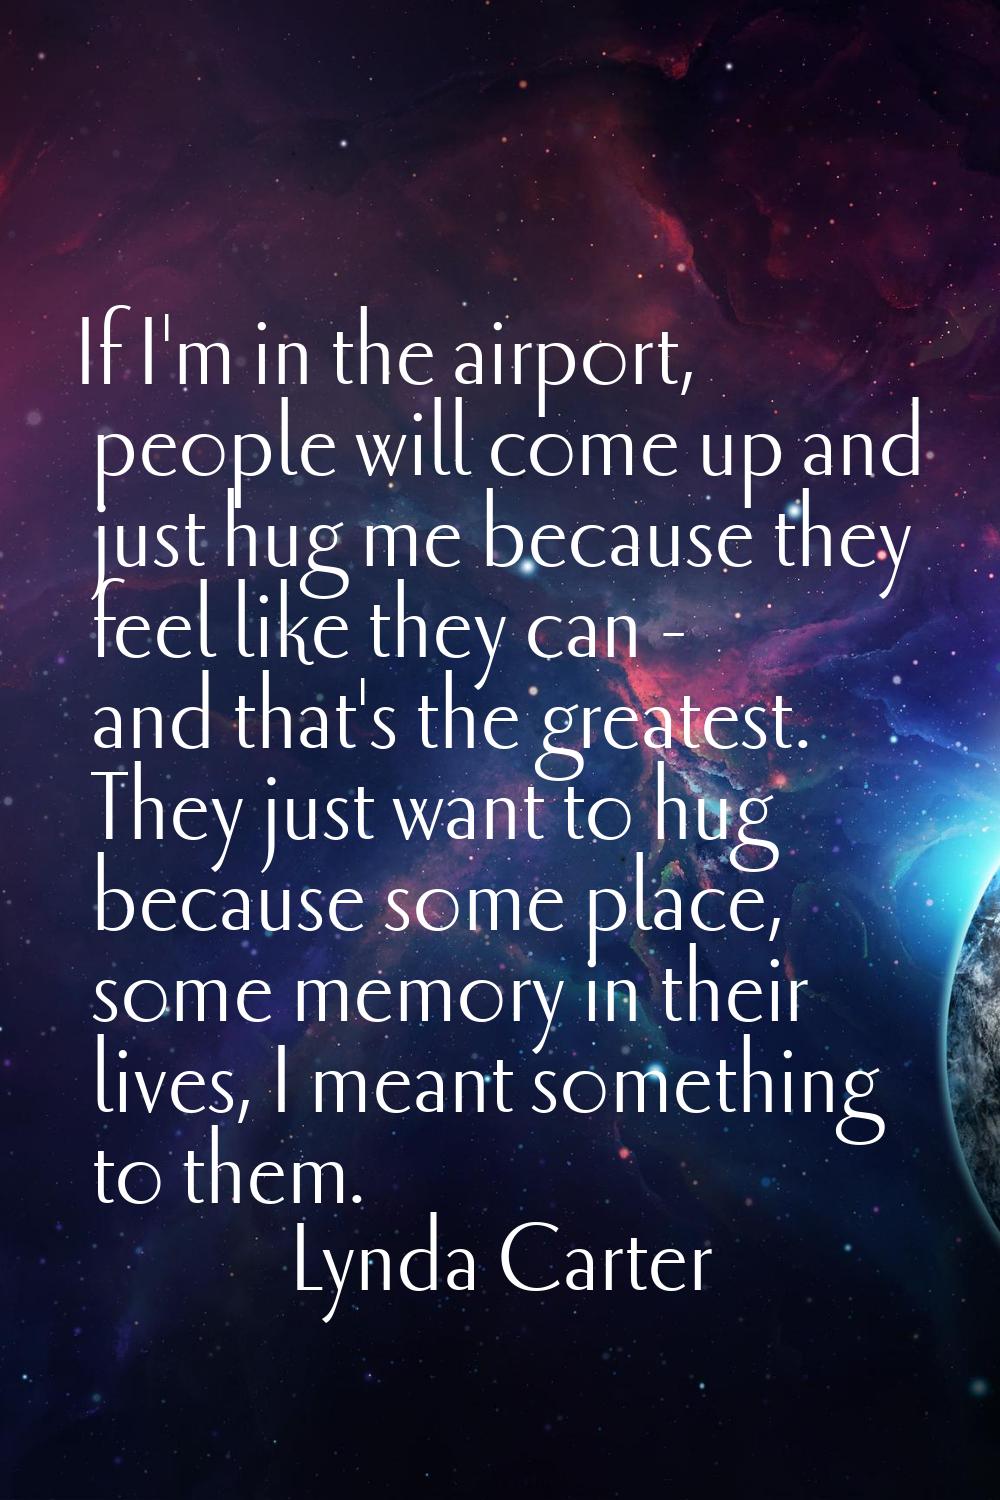 If I'm in the airport, people will come up and just hug me because they feel like they can - and th